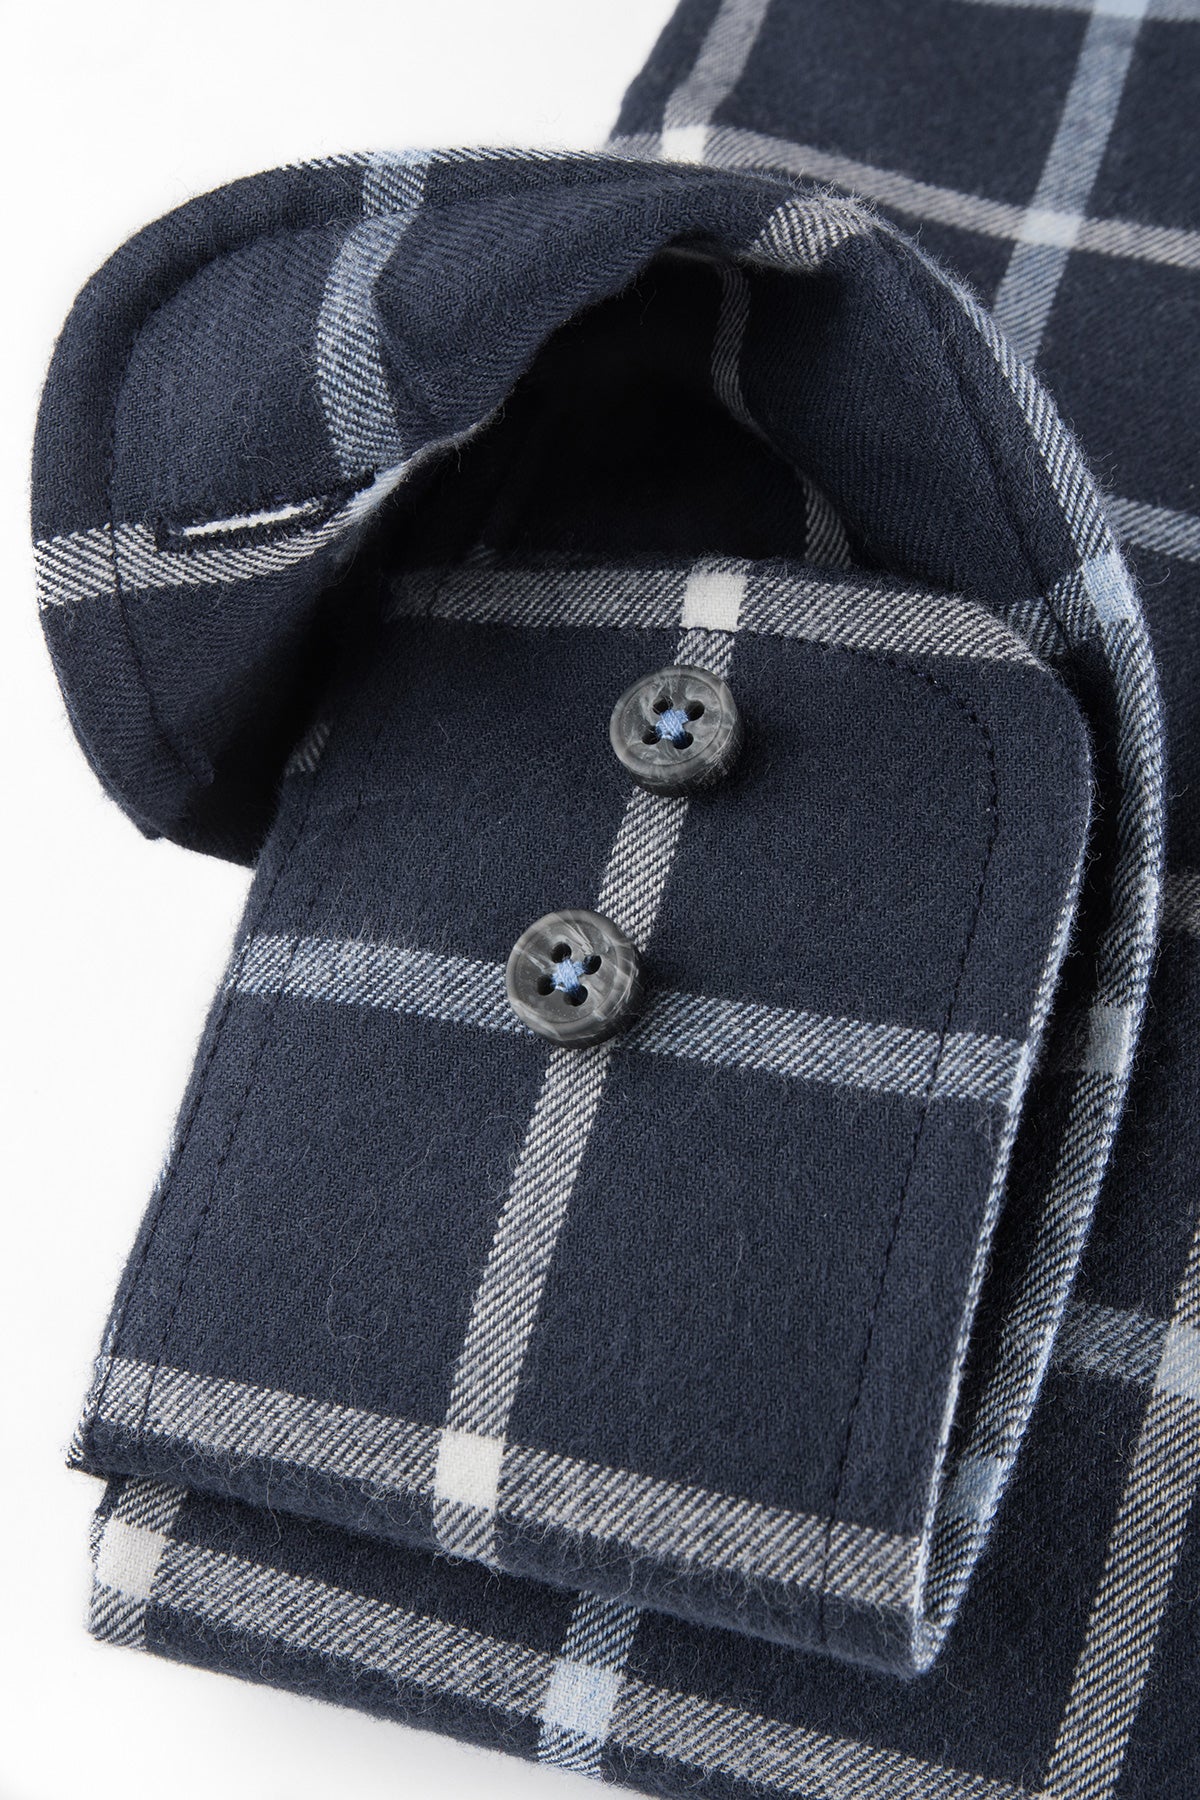 Navy blue checked slim fit flannel shirt